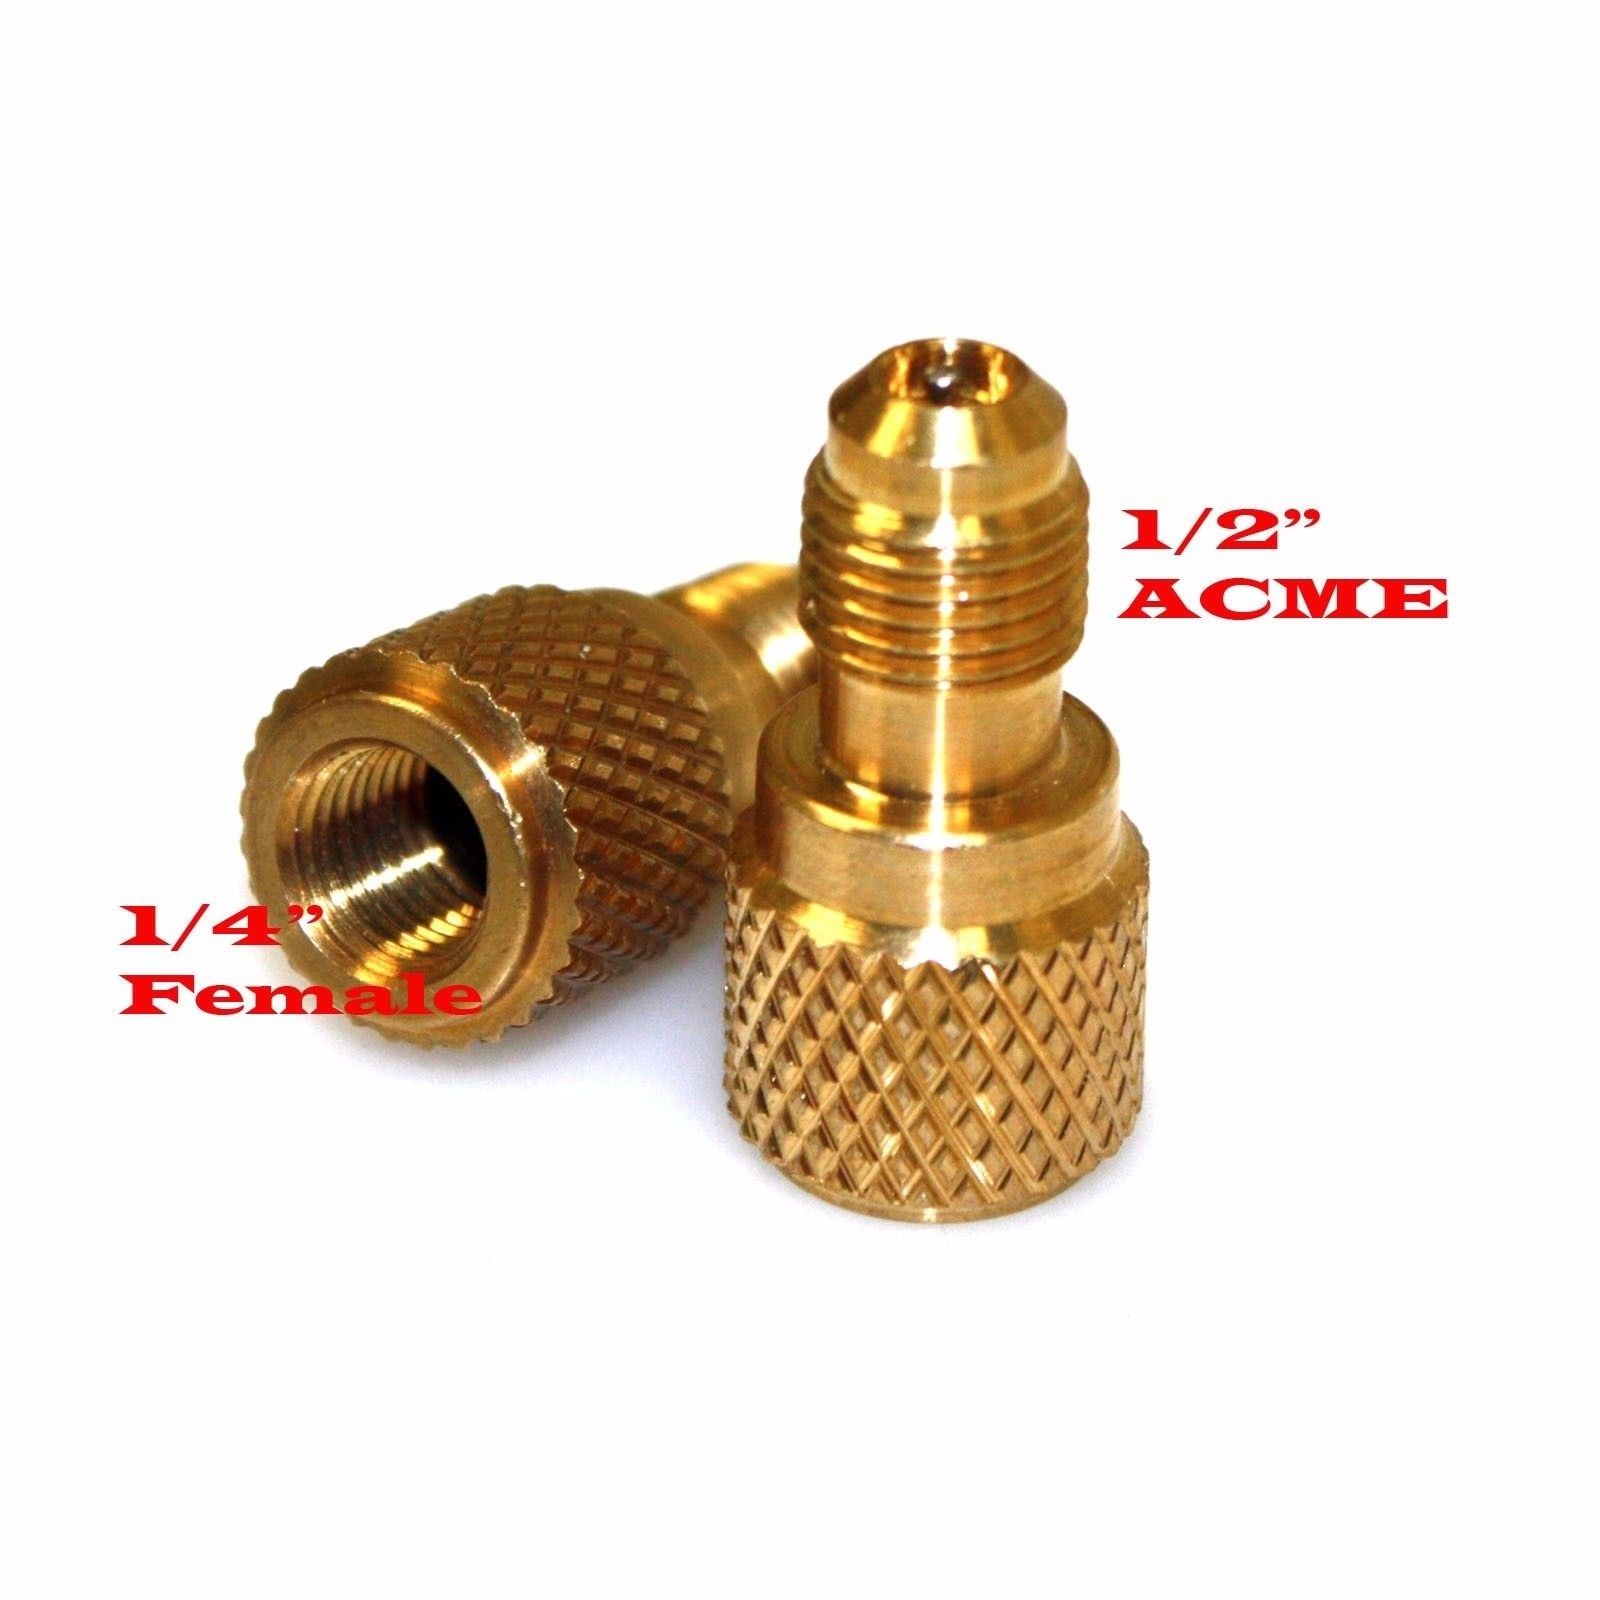 ACME A/C R134a Brass Fitting Adapter 1/4" Male To 1/2" Female Valve Core Tool JH 